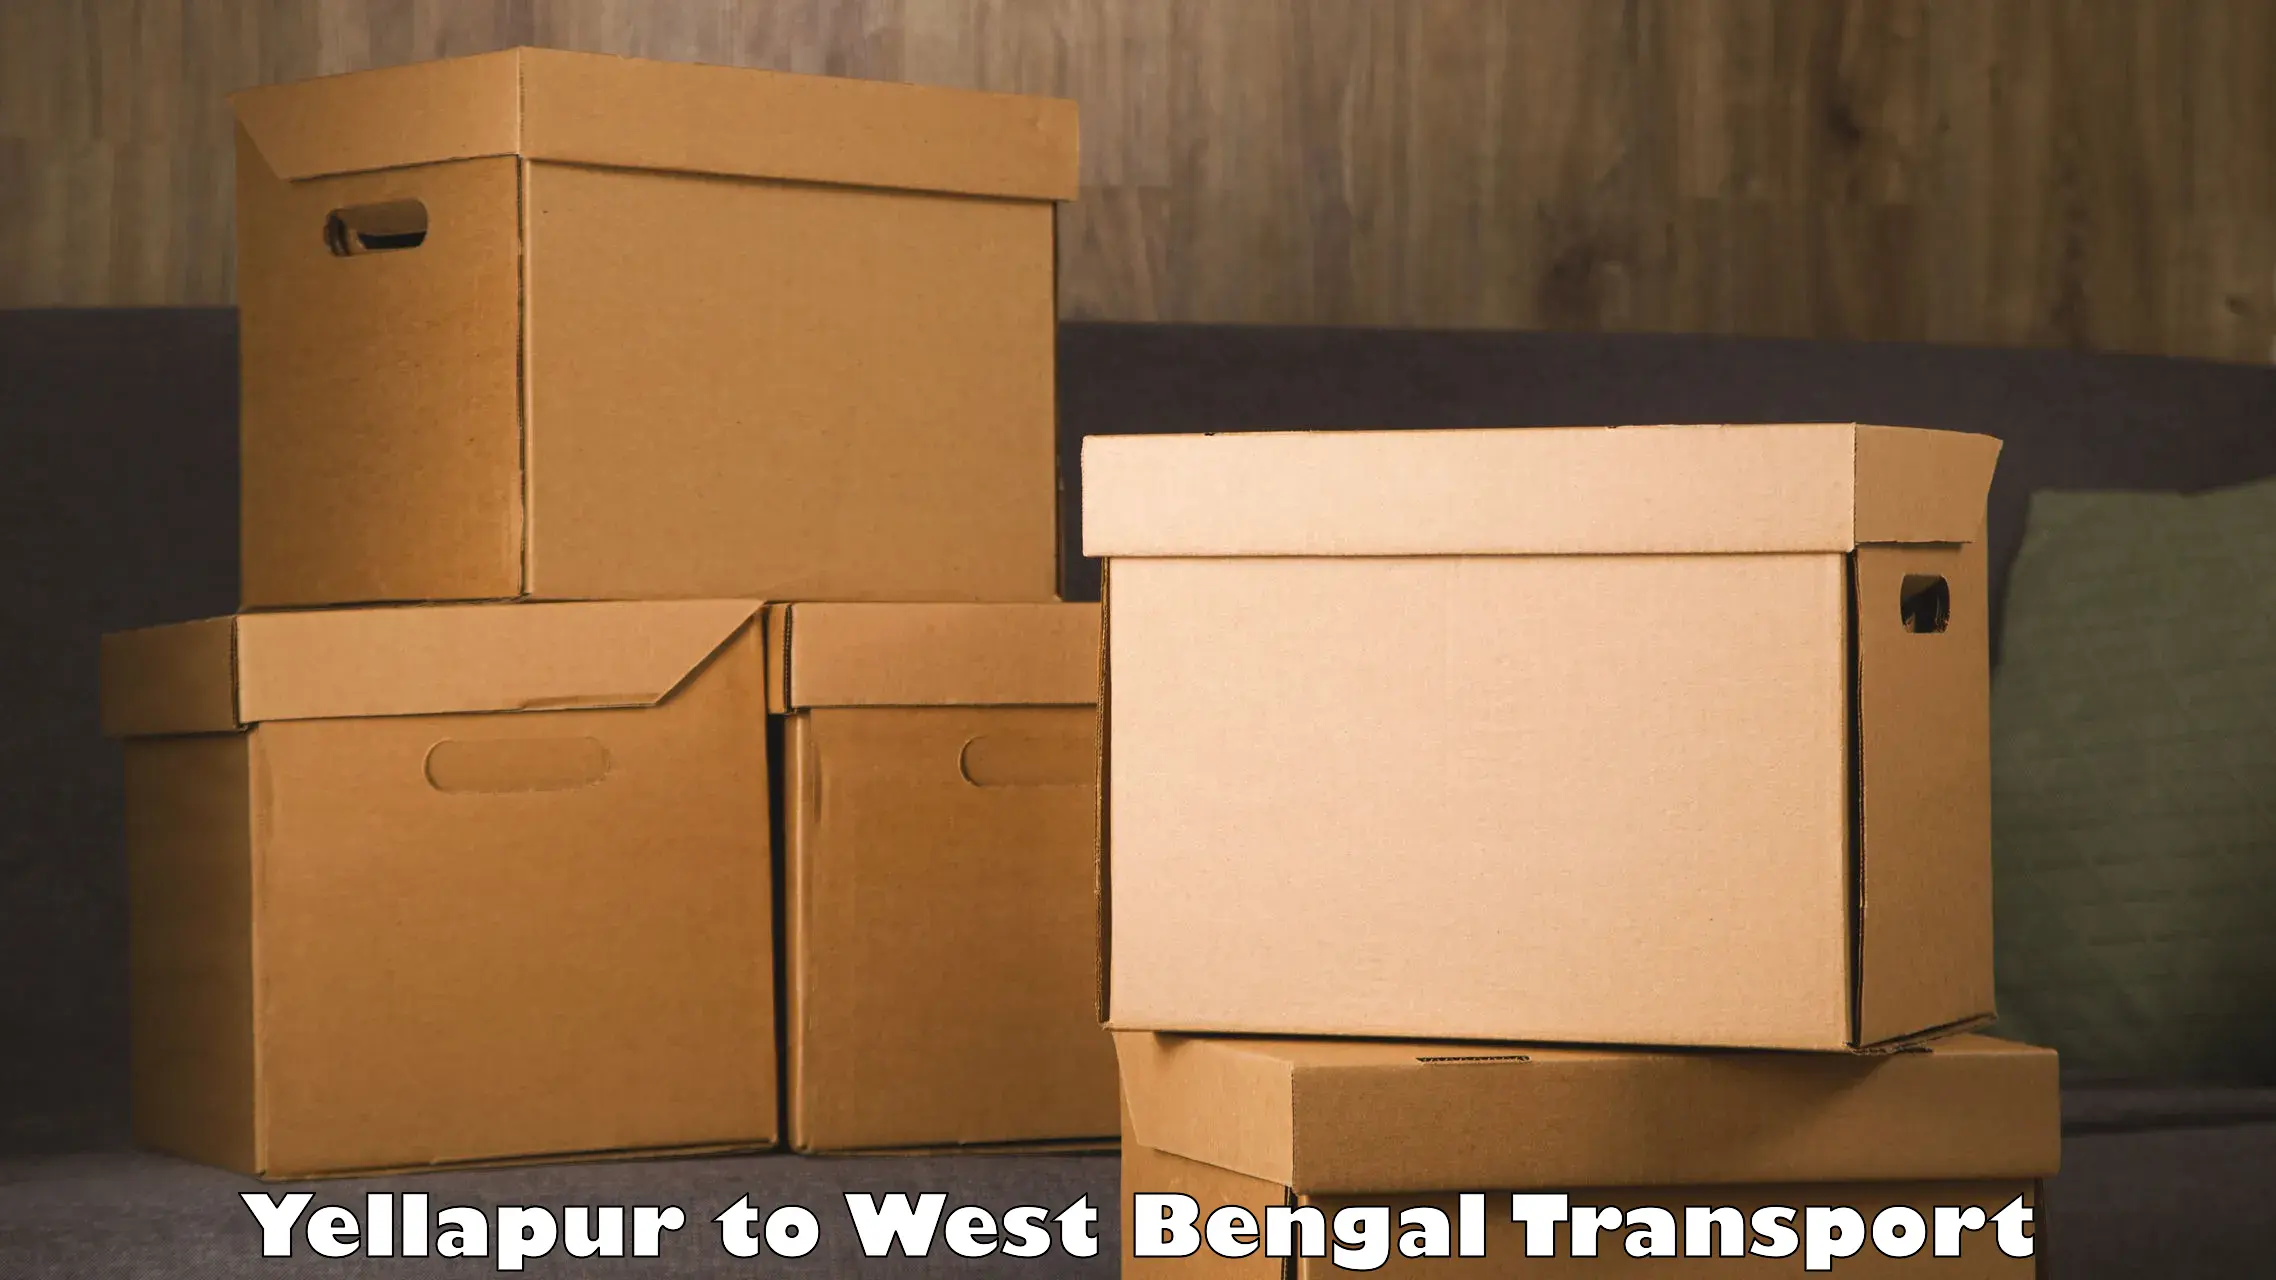 Container transport service Yellapur to Mohammad Bazar